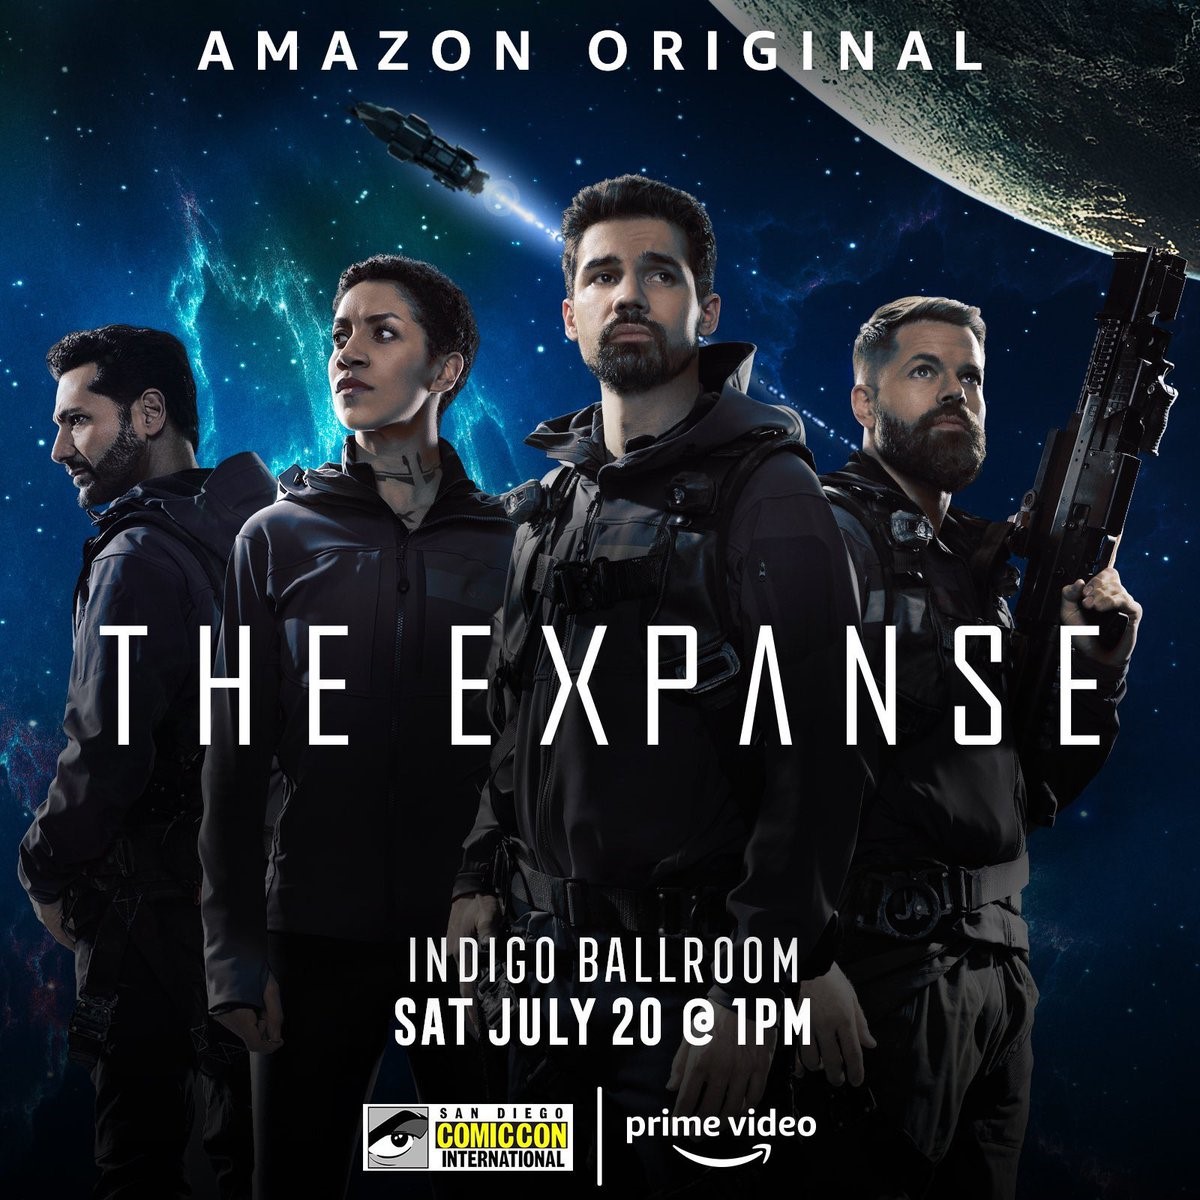 if you like the expanse books